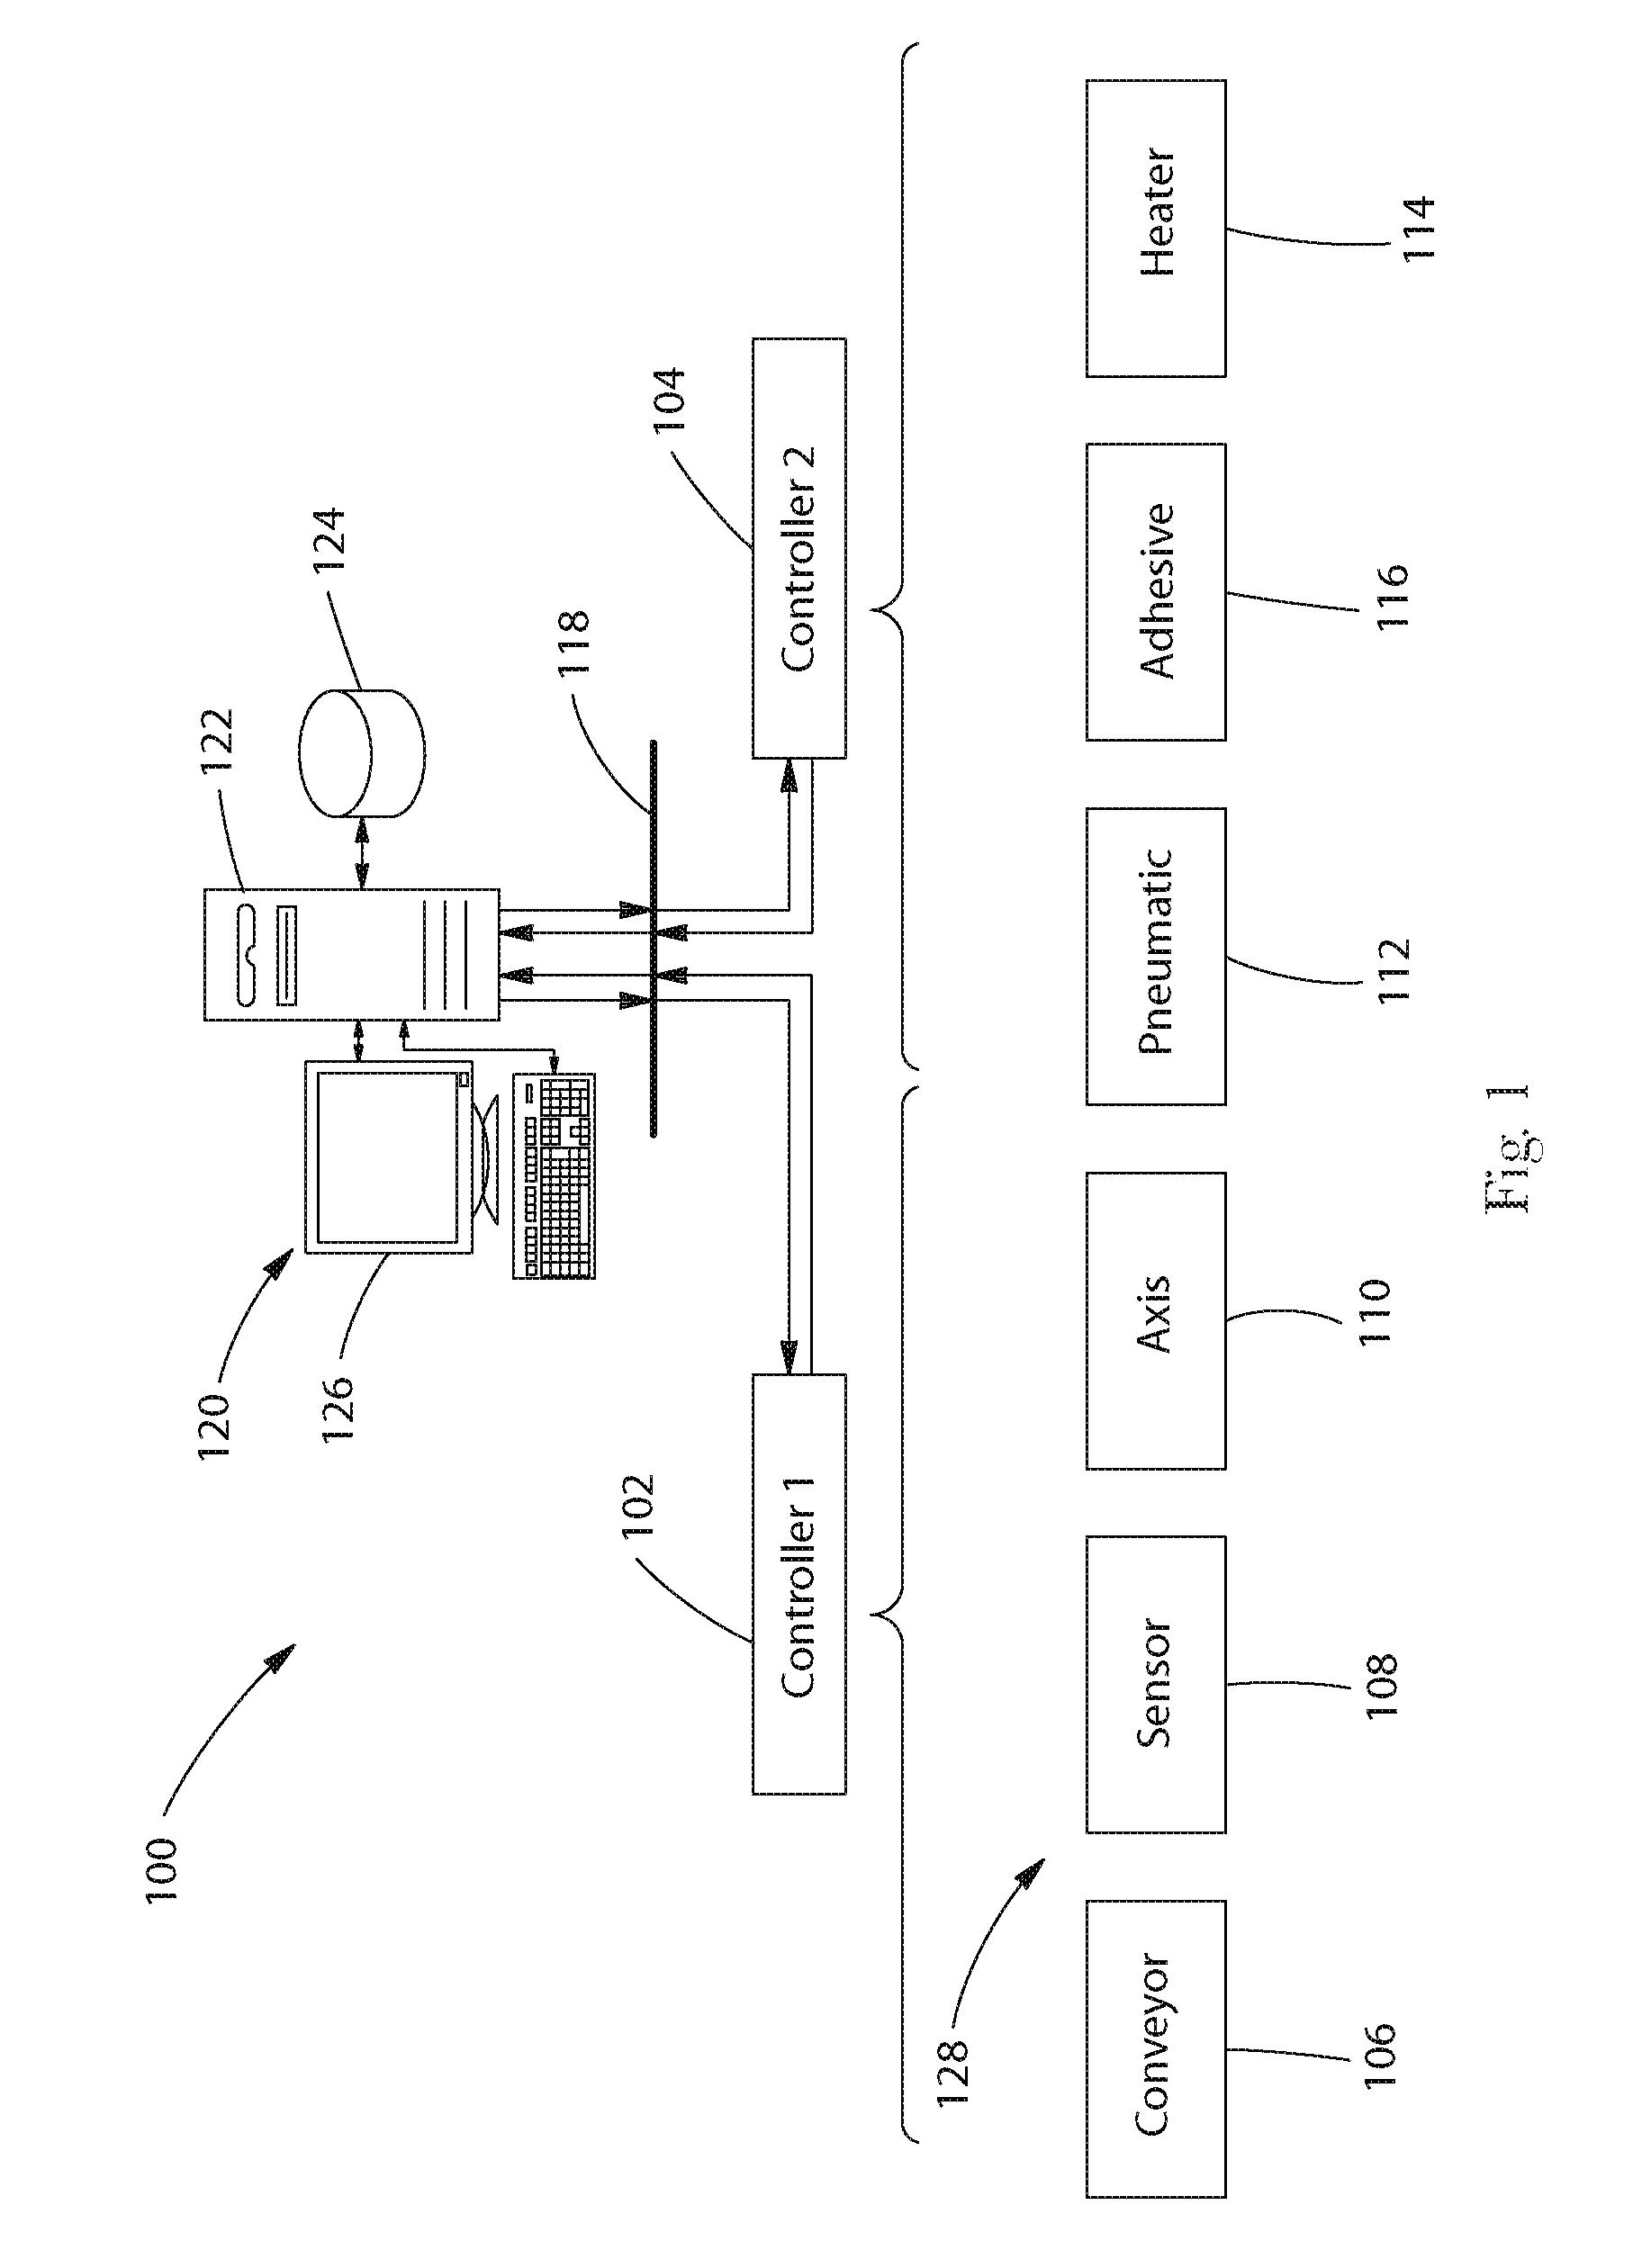 Apparatus, system, and method for managing industrial software configurations